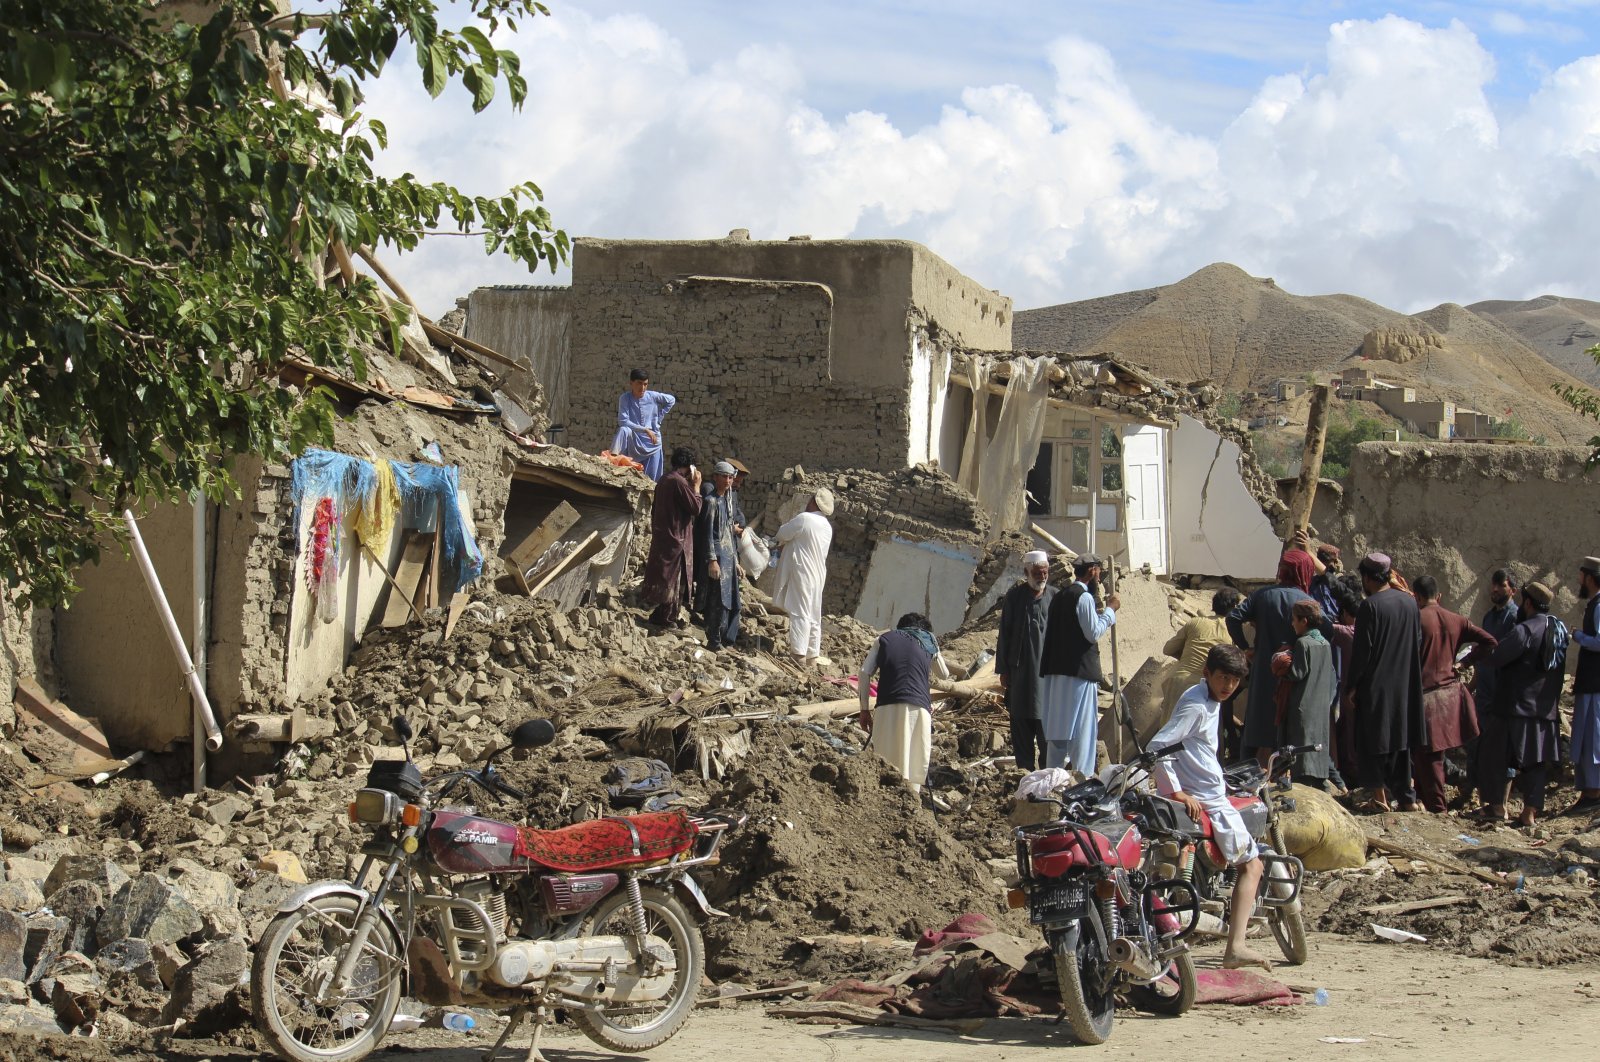 People clean up their damaged homes after heavy flooding in the Khushi district of Logar province south of Kabul, Afghanistan, Aug. 21, 2022. (AP Photo)